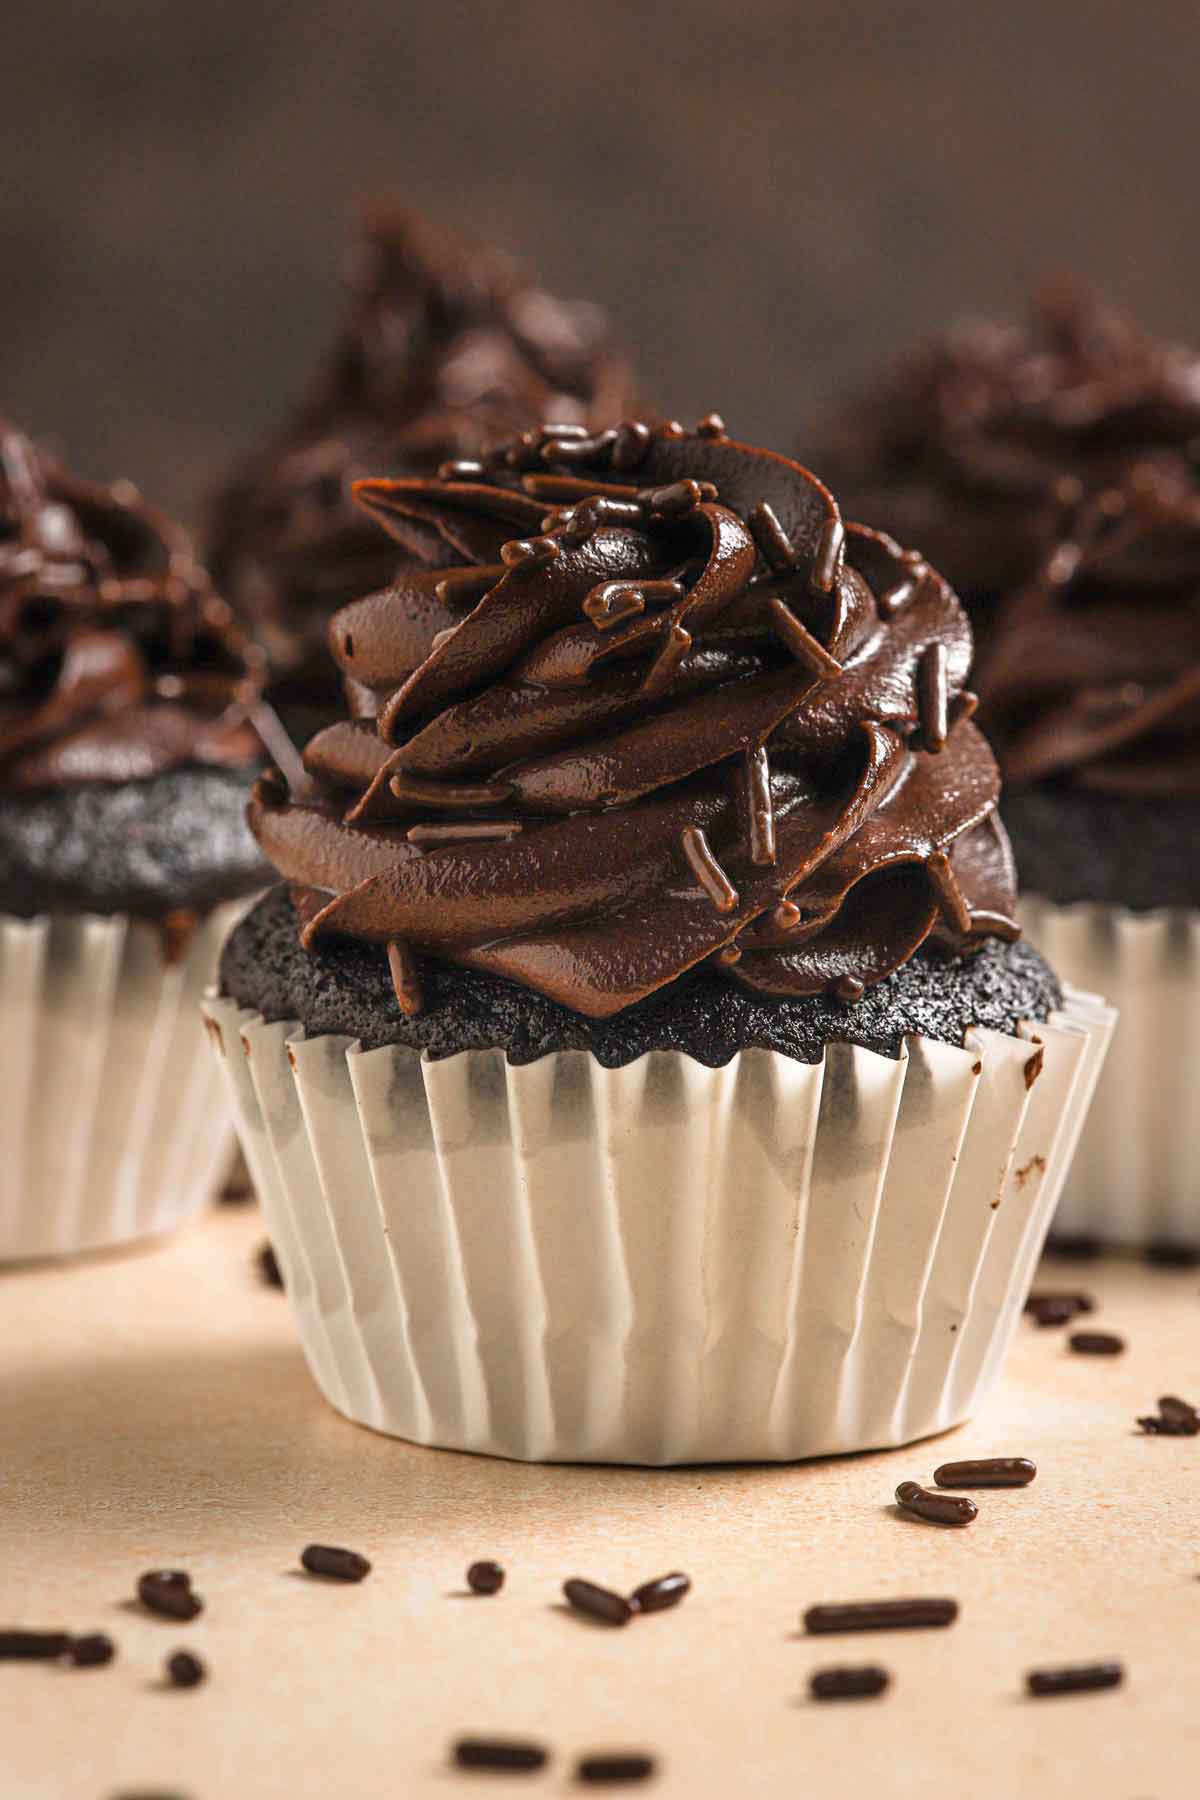 Head-on close-up photo of a chocolate cupcake in a white paper liner with chocolate frosting and chocolate sprinkles.